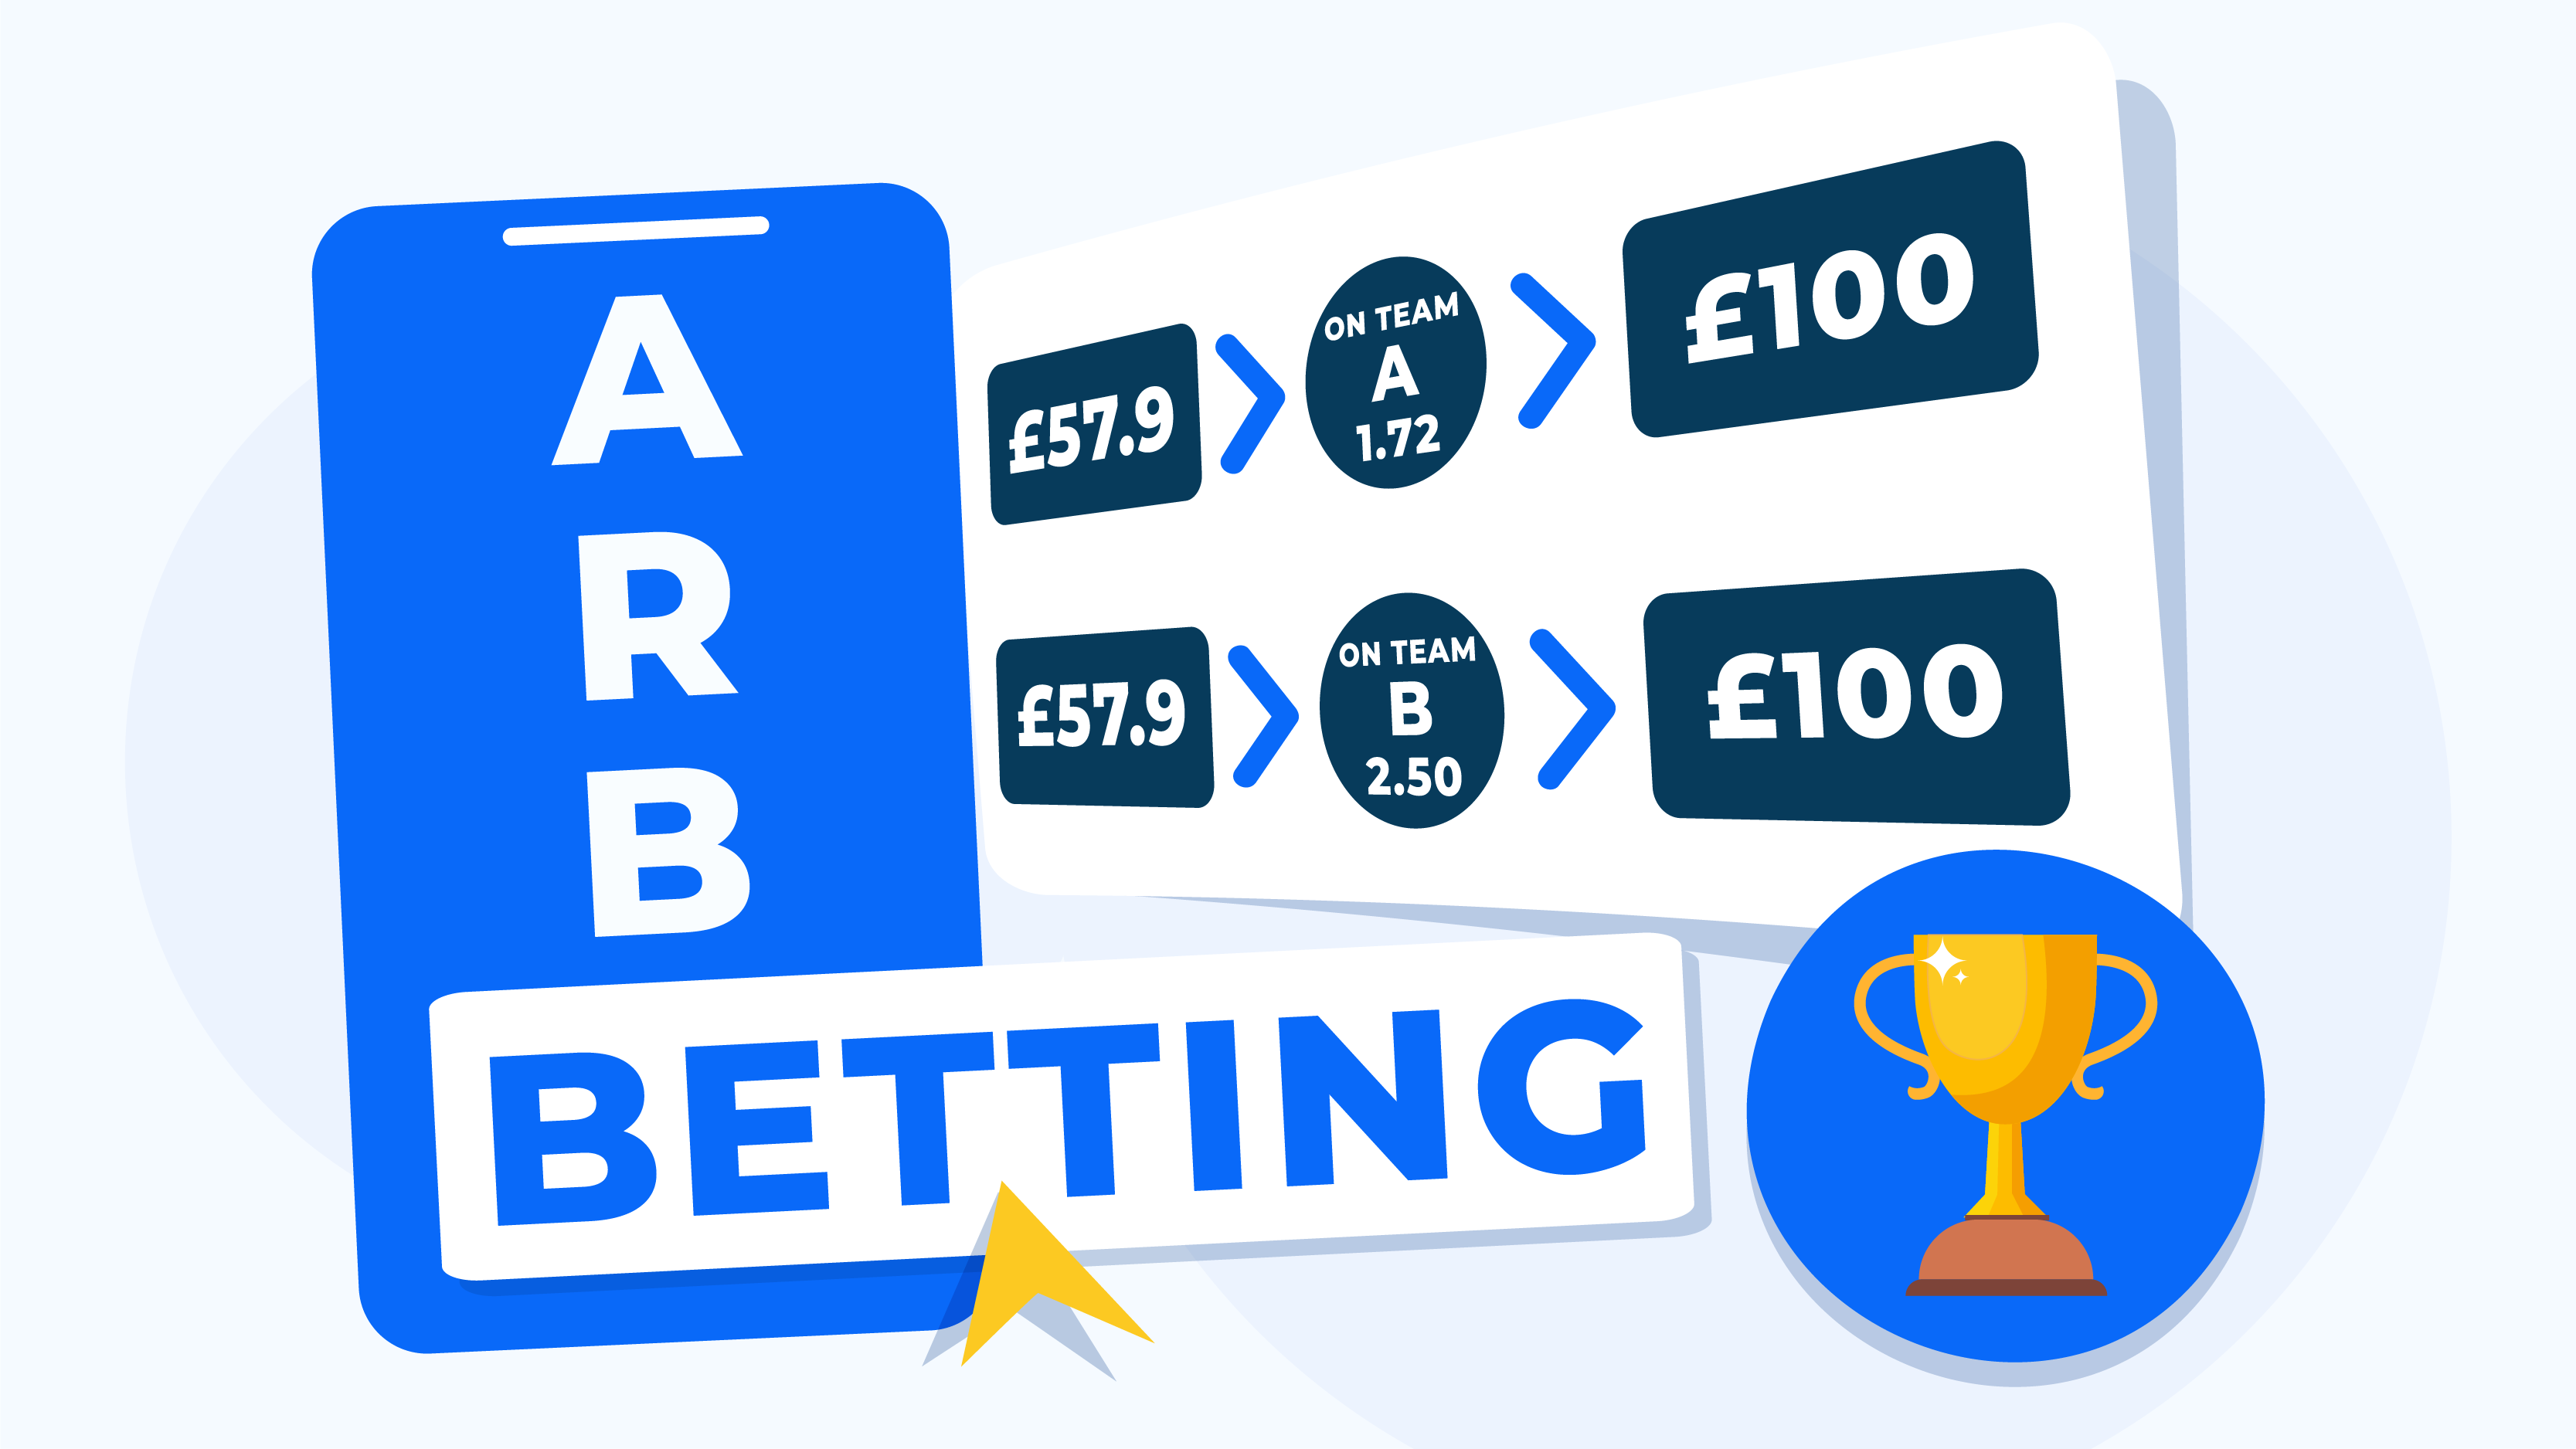 Arb Betting Tips | What is Arbitrage Betting & How-to Guide